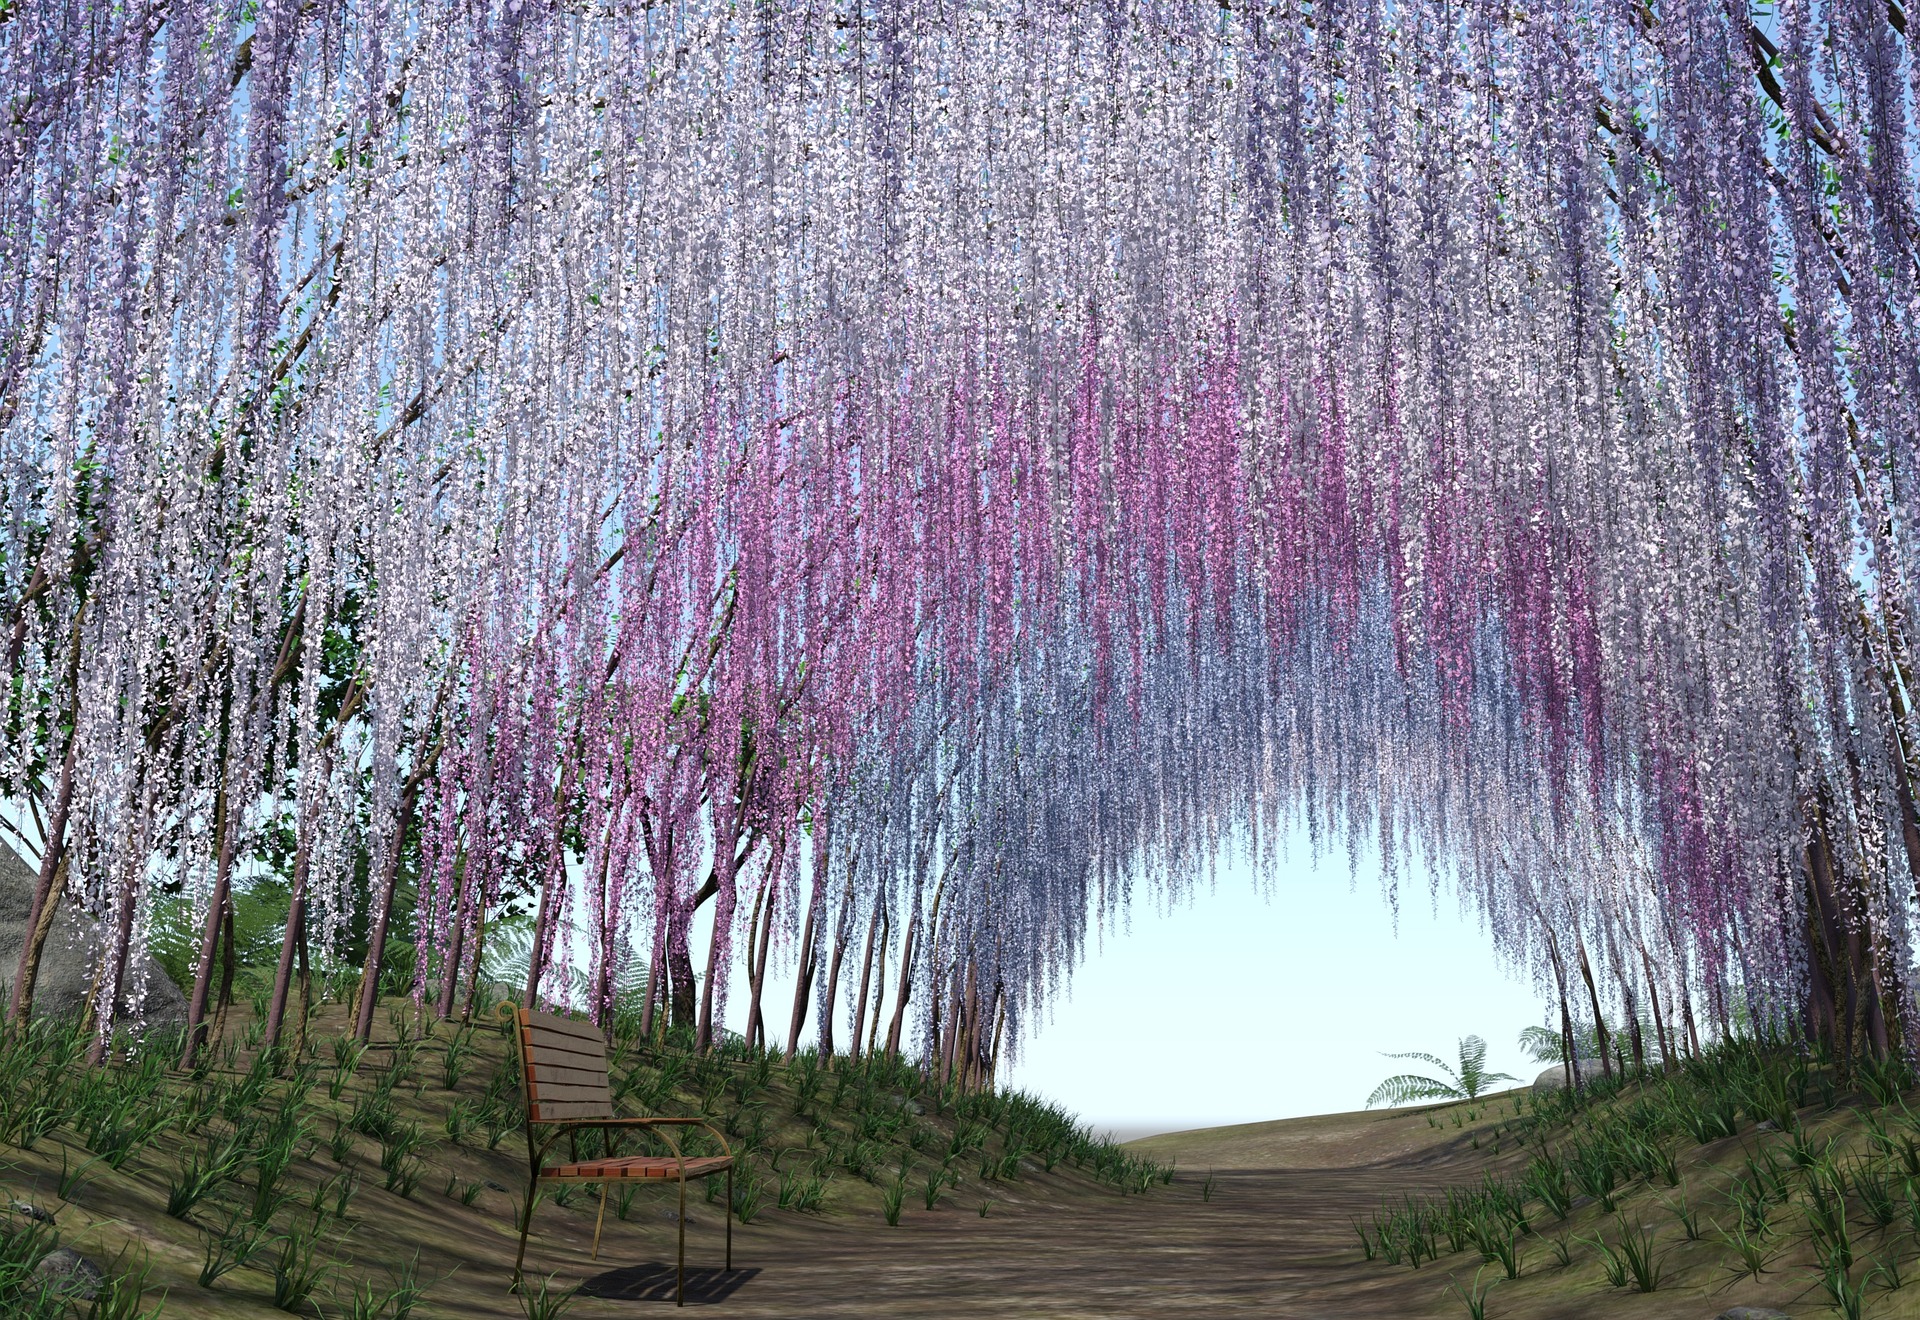 How to Grow Wisteria: Tips and Tricks